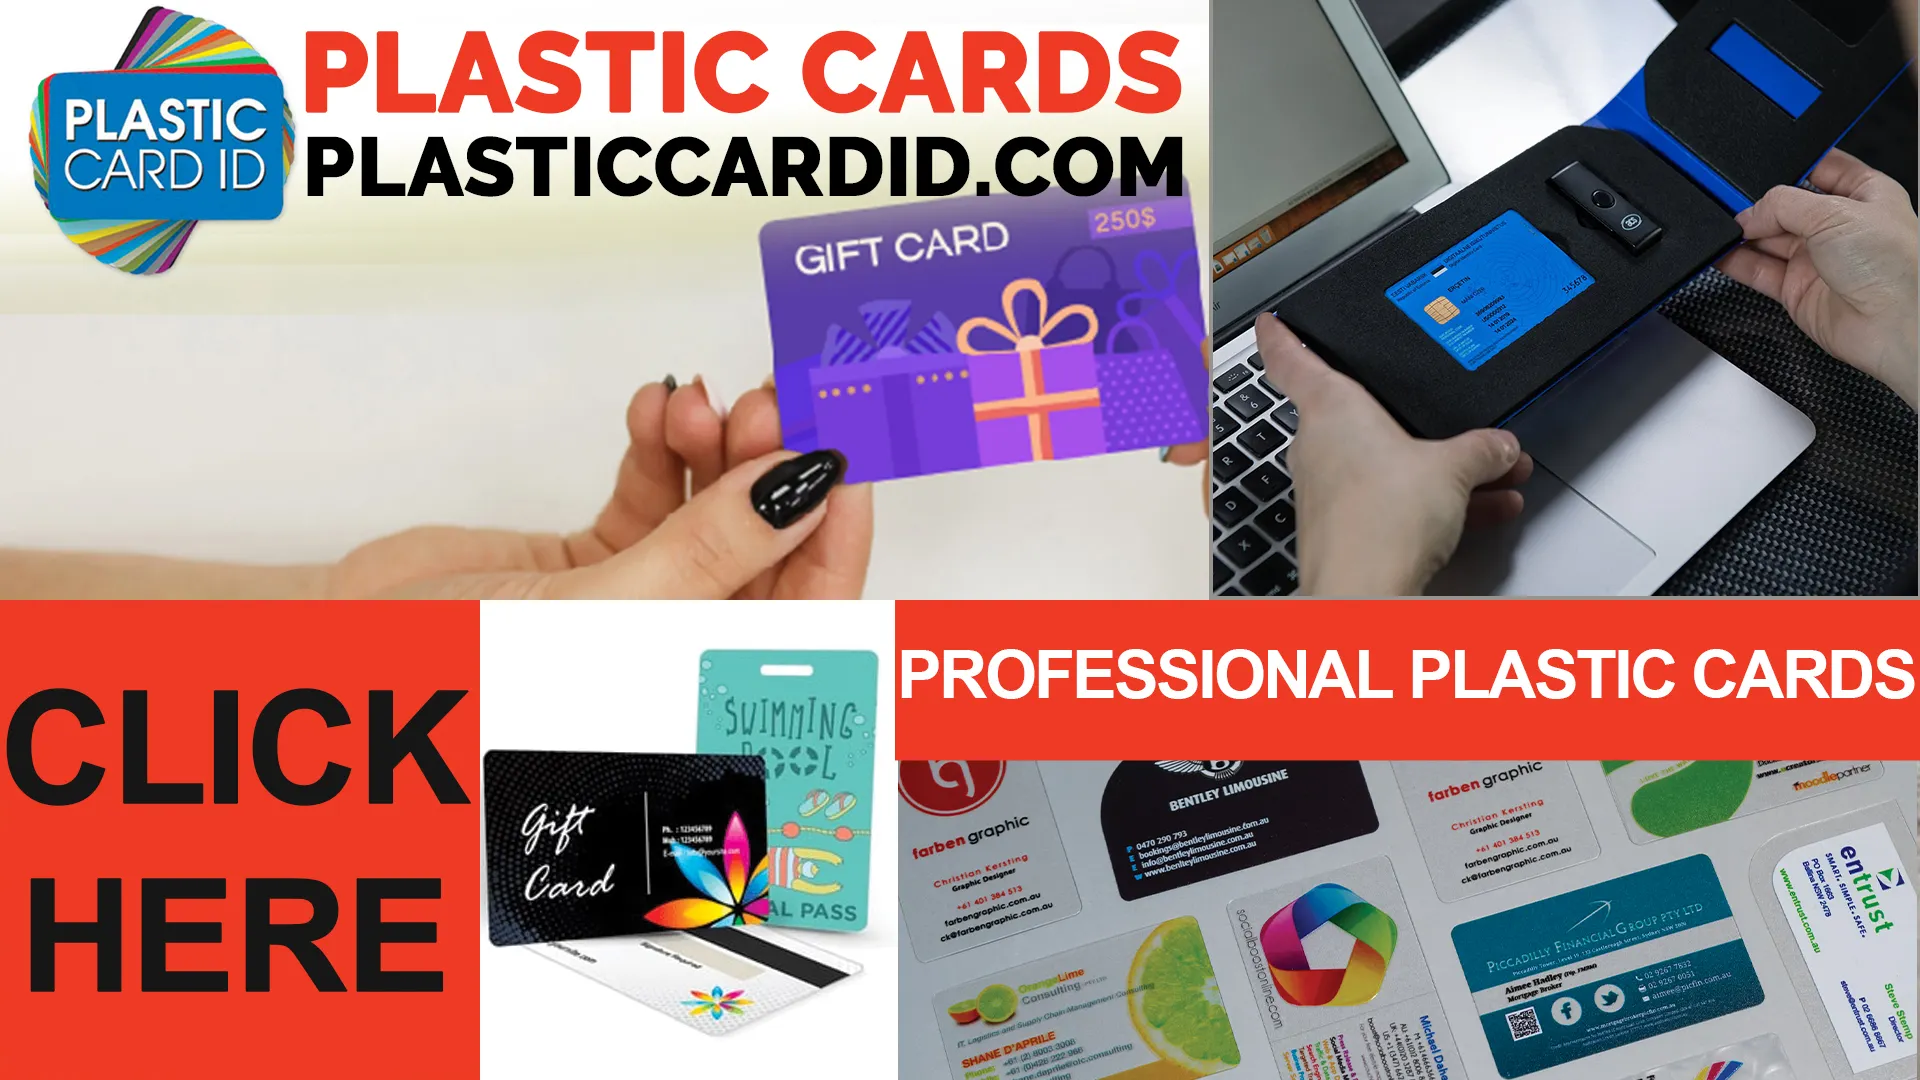 Welcome to the World of Advanced Security with Plastic Card ID




